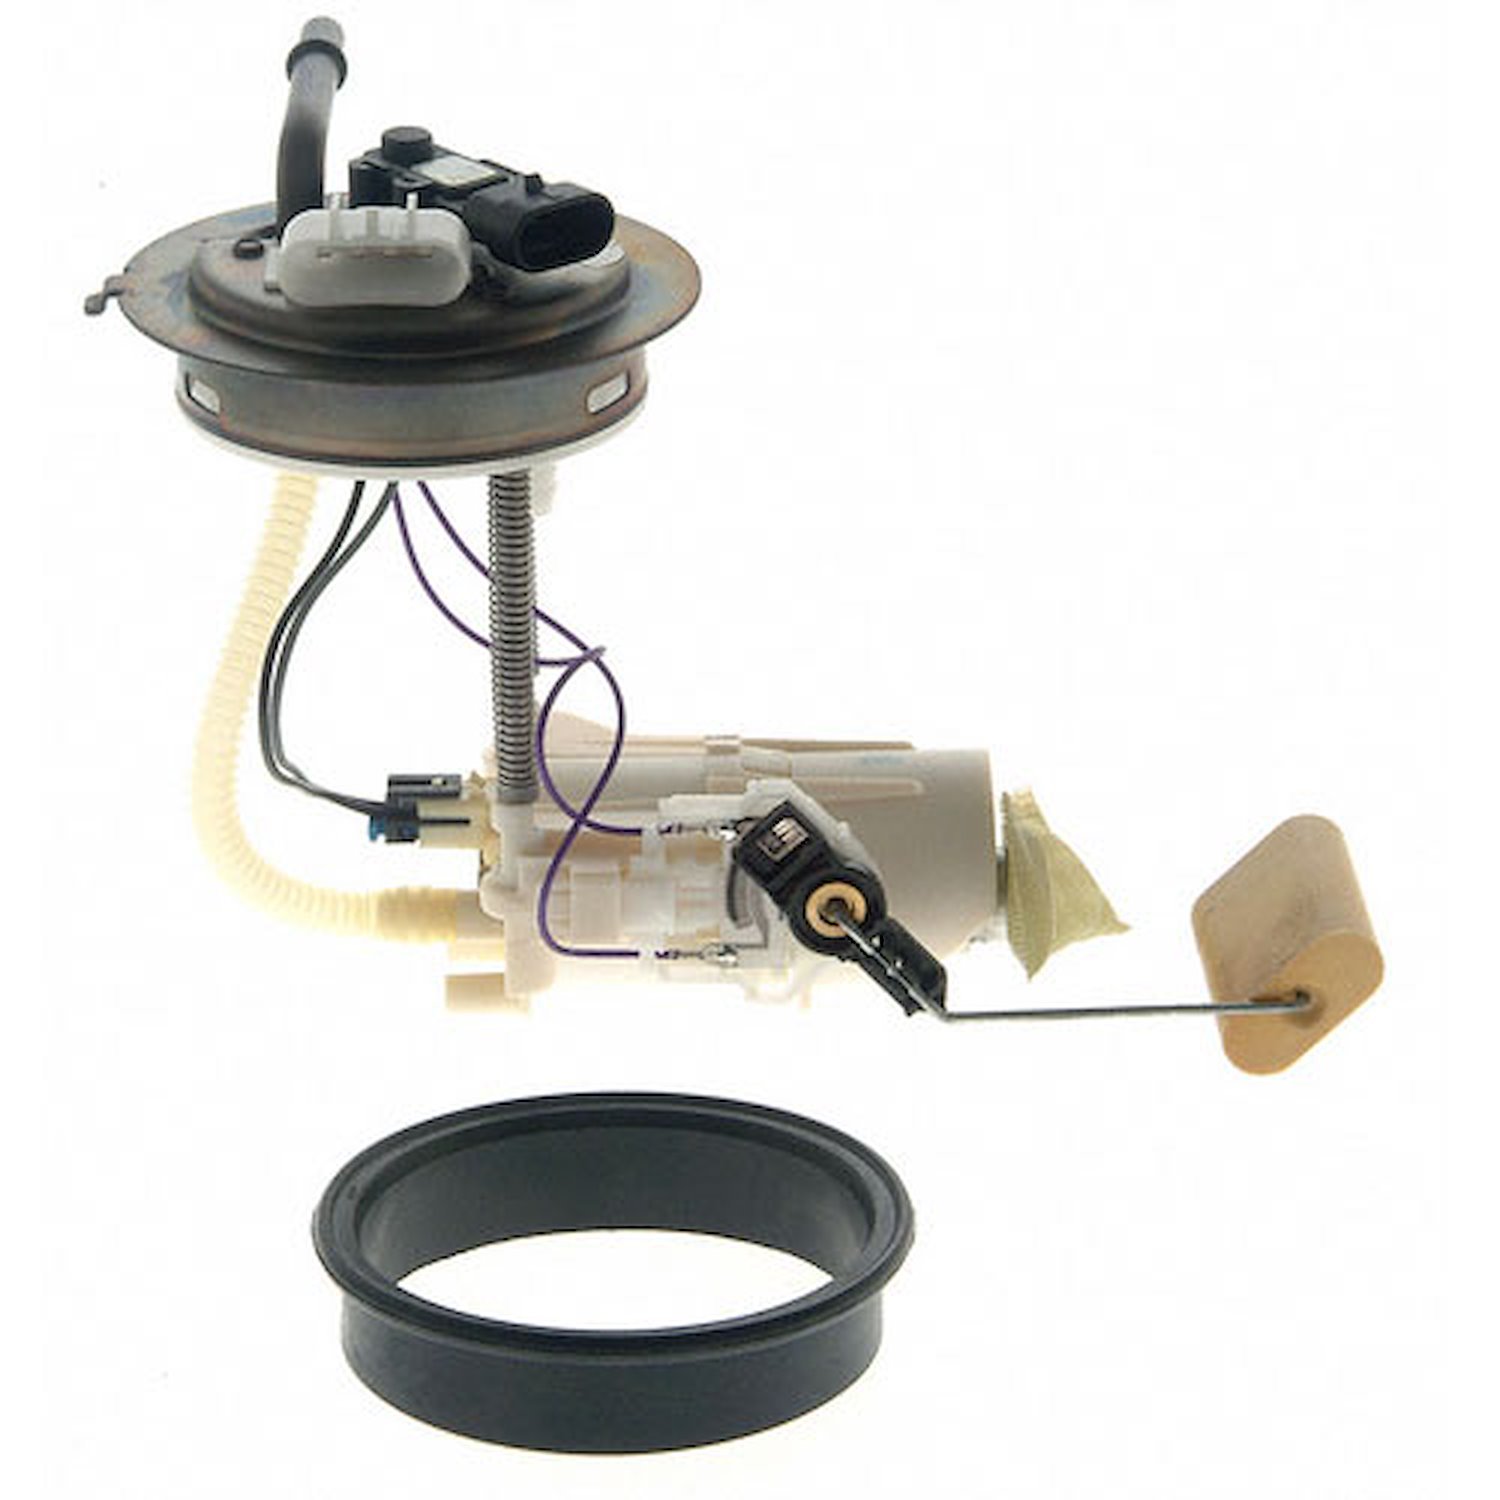 OE GM Replacement Electric Fuel Pump Module Assembly 2002 Chevrolet Avalanche 2500/Suburban 2500 6.0L/8.1L V8